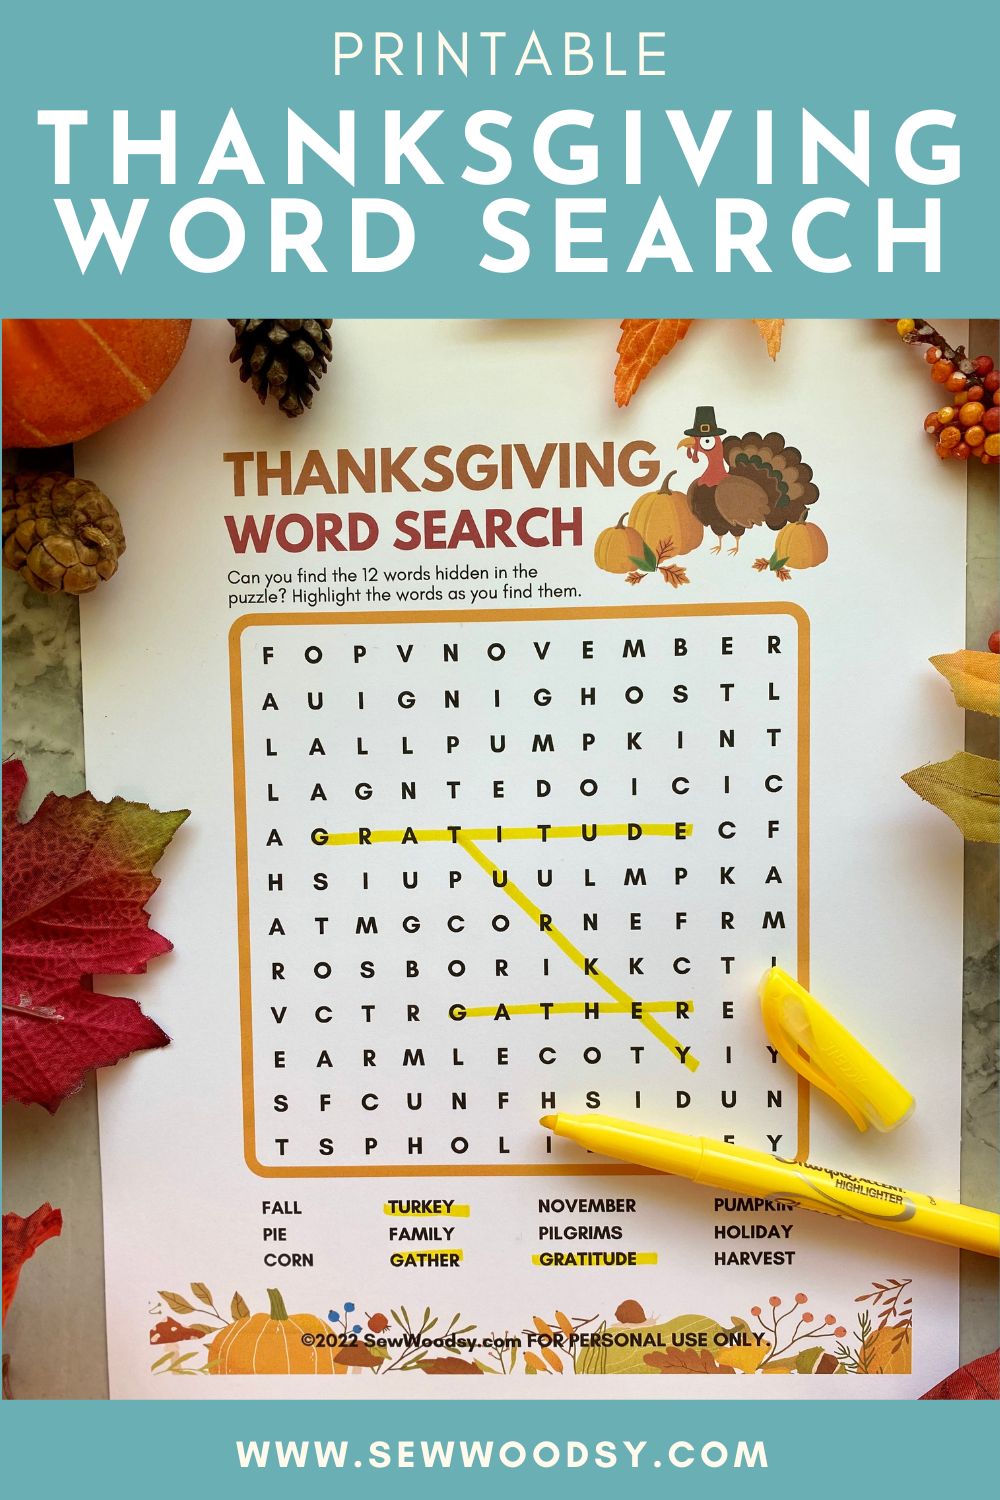 Paper word search with text on image for pinterest.